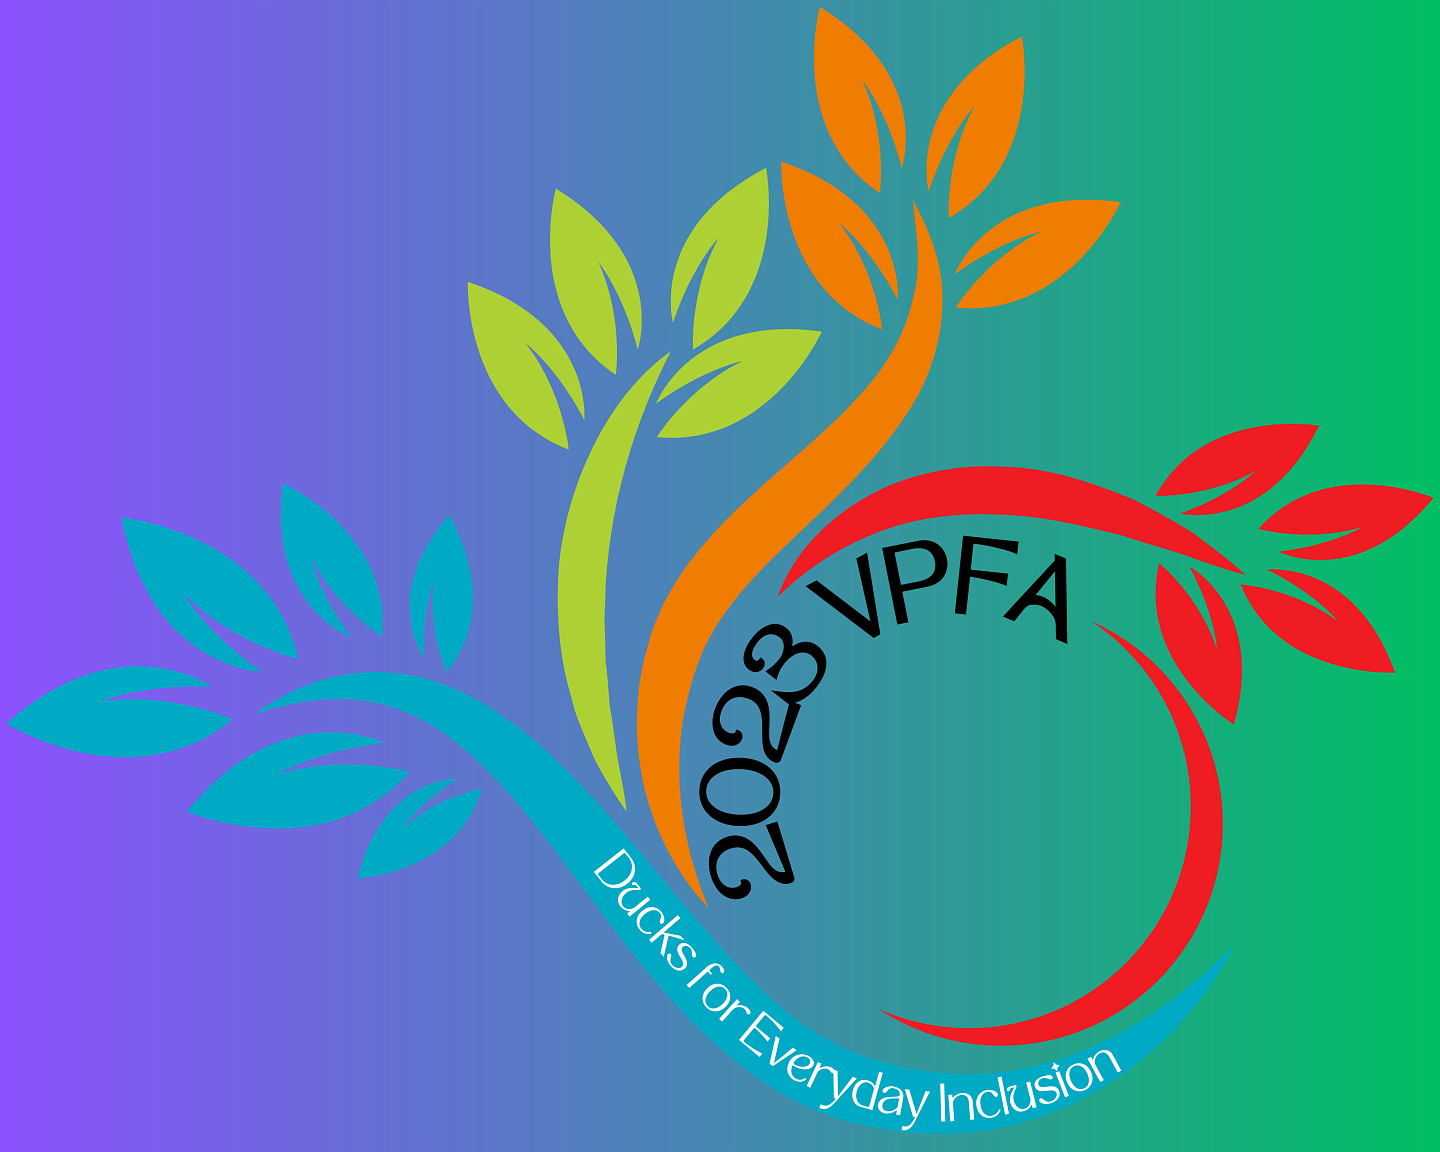 Four colorful plant leaf spirals with the text: 2023 VPFA Ducks for Everyday Inclusion (colorful background)